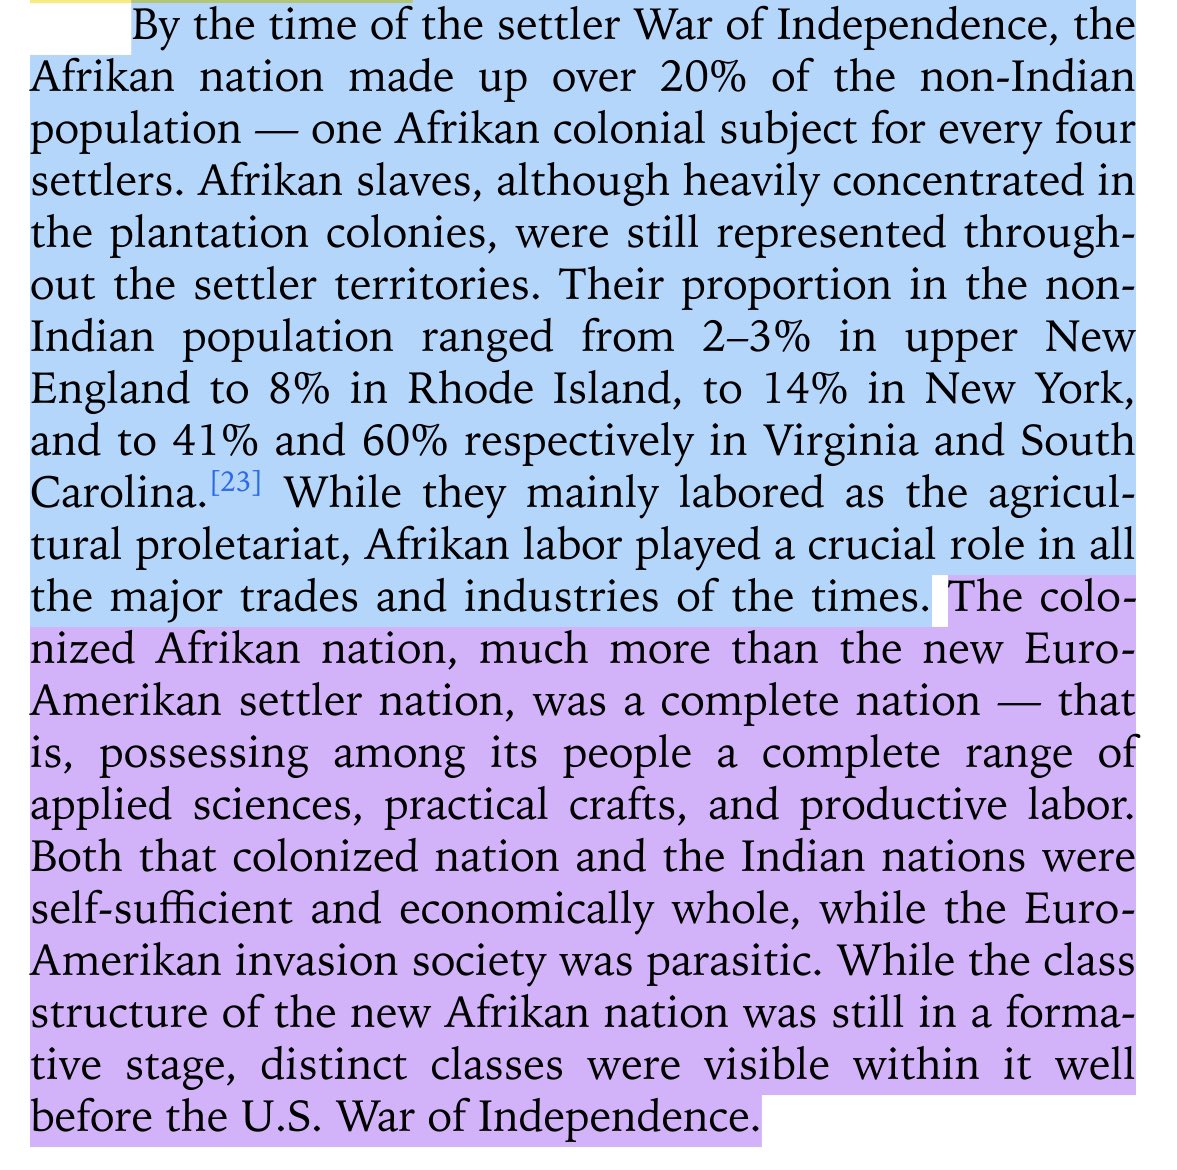 “...self-sufficient & economically whole, while the euro-amerikan invasion society was parasitic. while the class structure of the new afrikan nation was still in a formative stage, distinct classes were visible within it well before the U.S. War of Independence.”